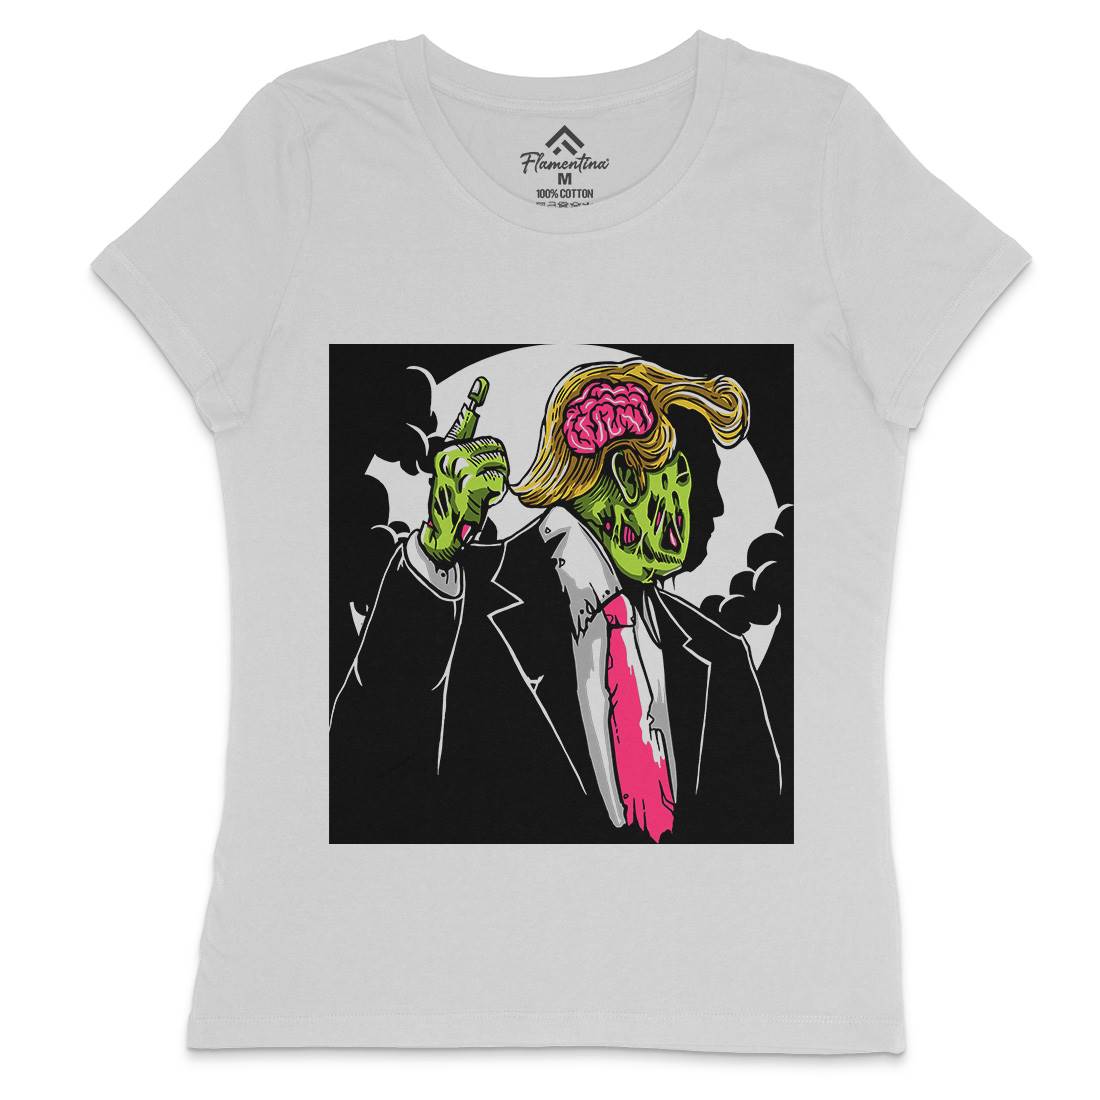 Make Zombie Great Again Womens Crew Neck T-Shirt Horror A554